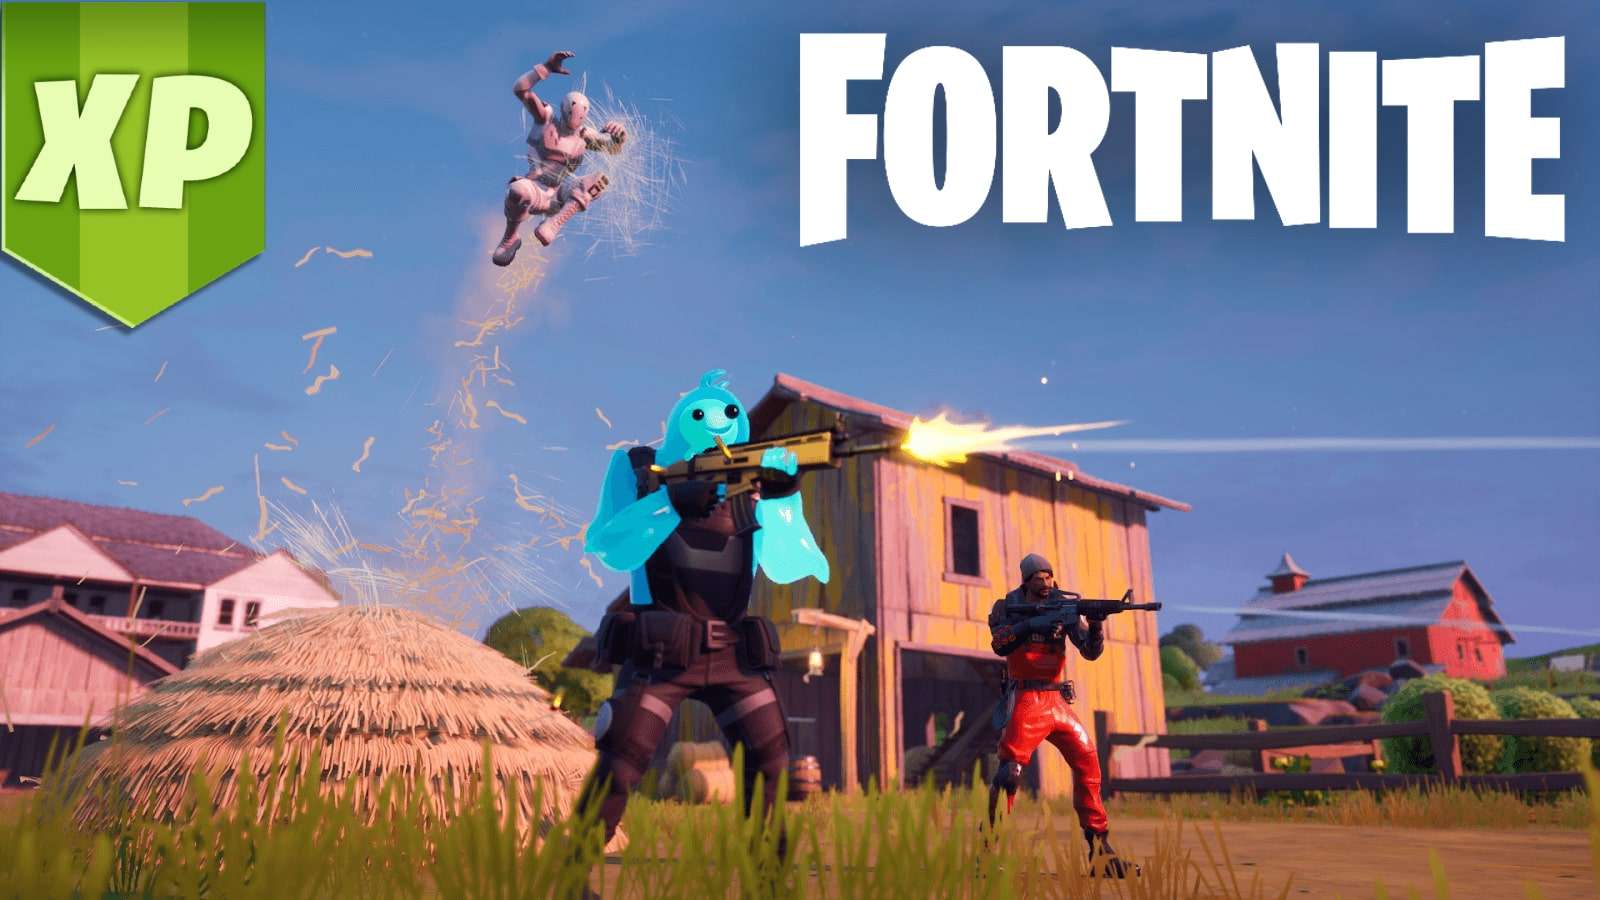 An in-game loading screen in Fortnite with the green XP tag